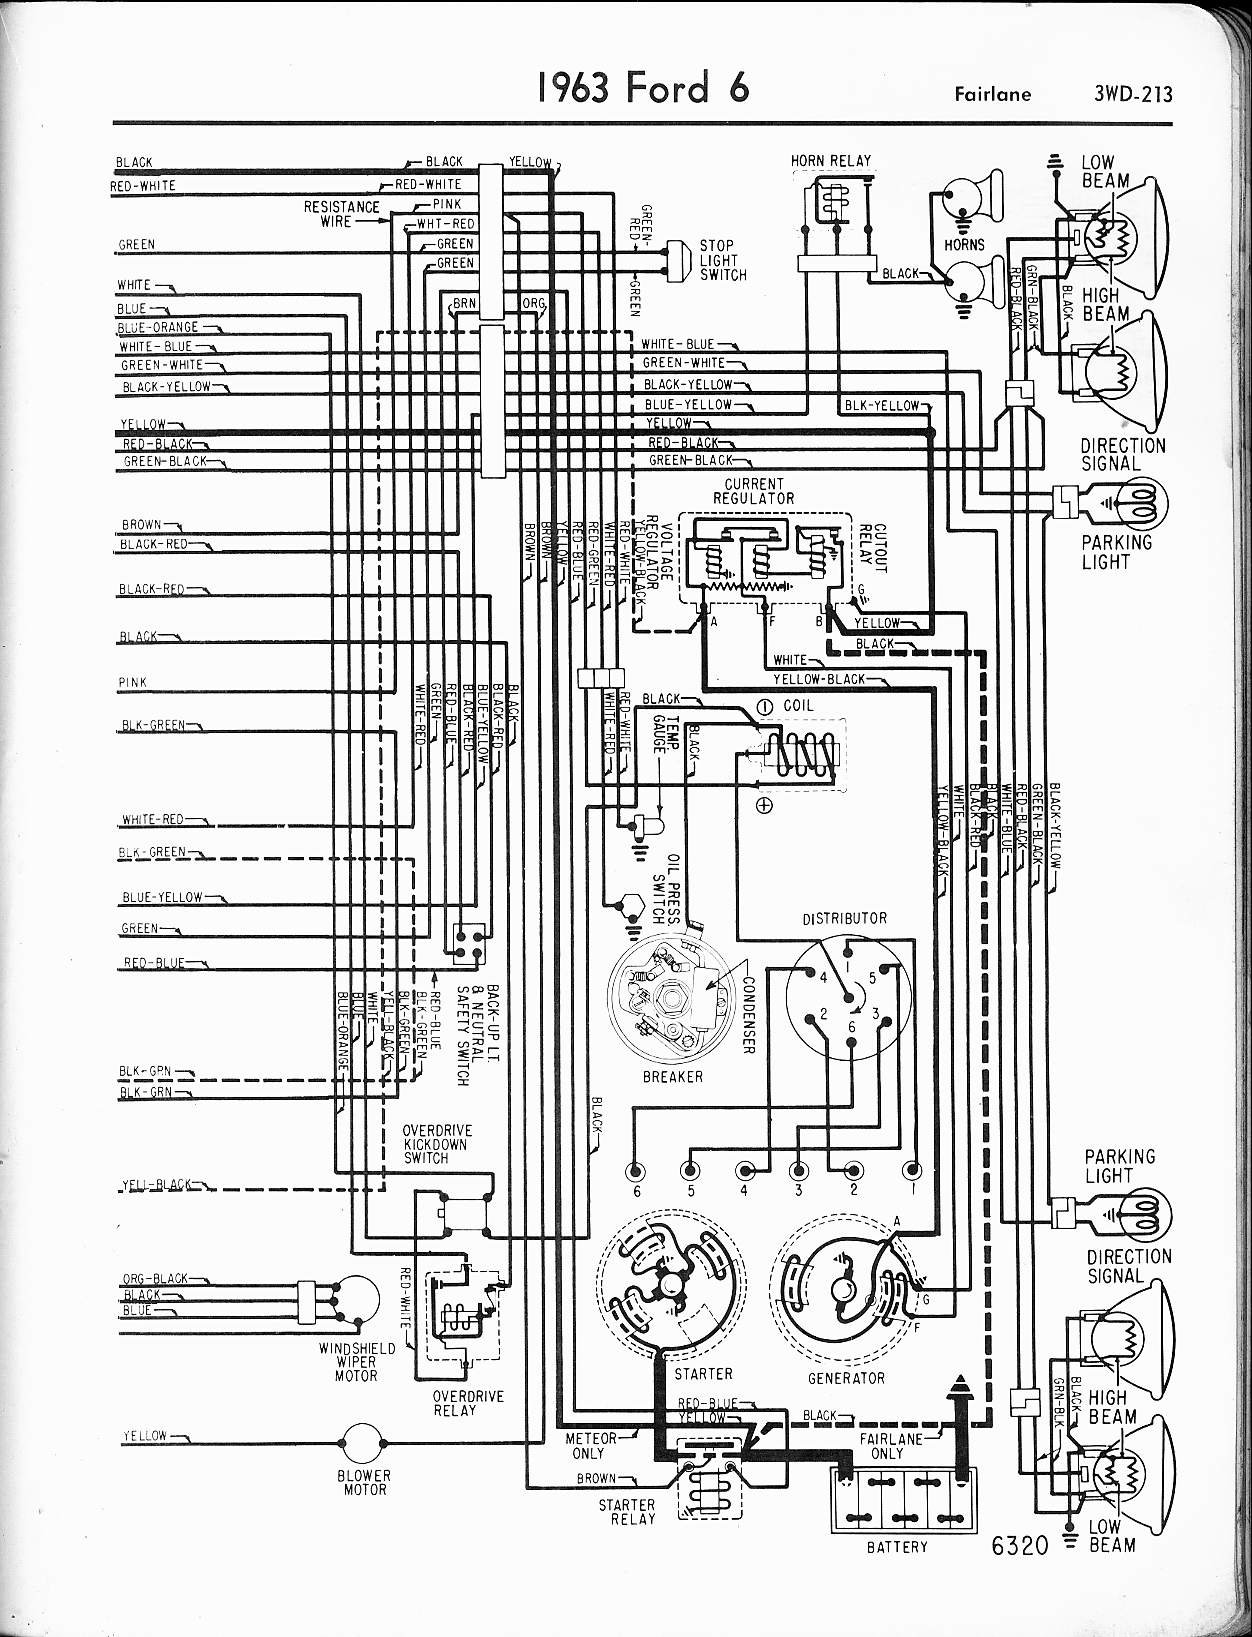 57-65 Ford Wiring Diagrams